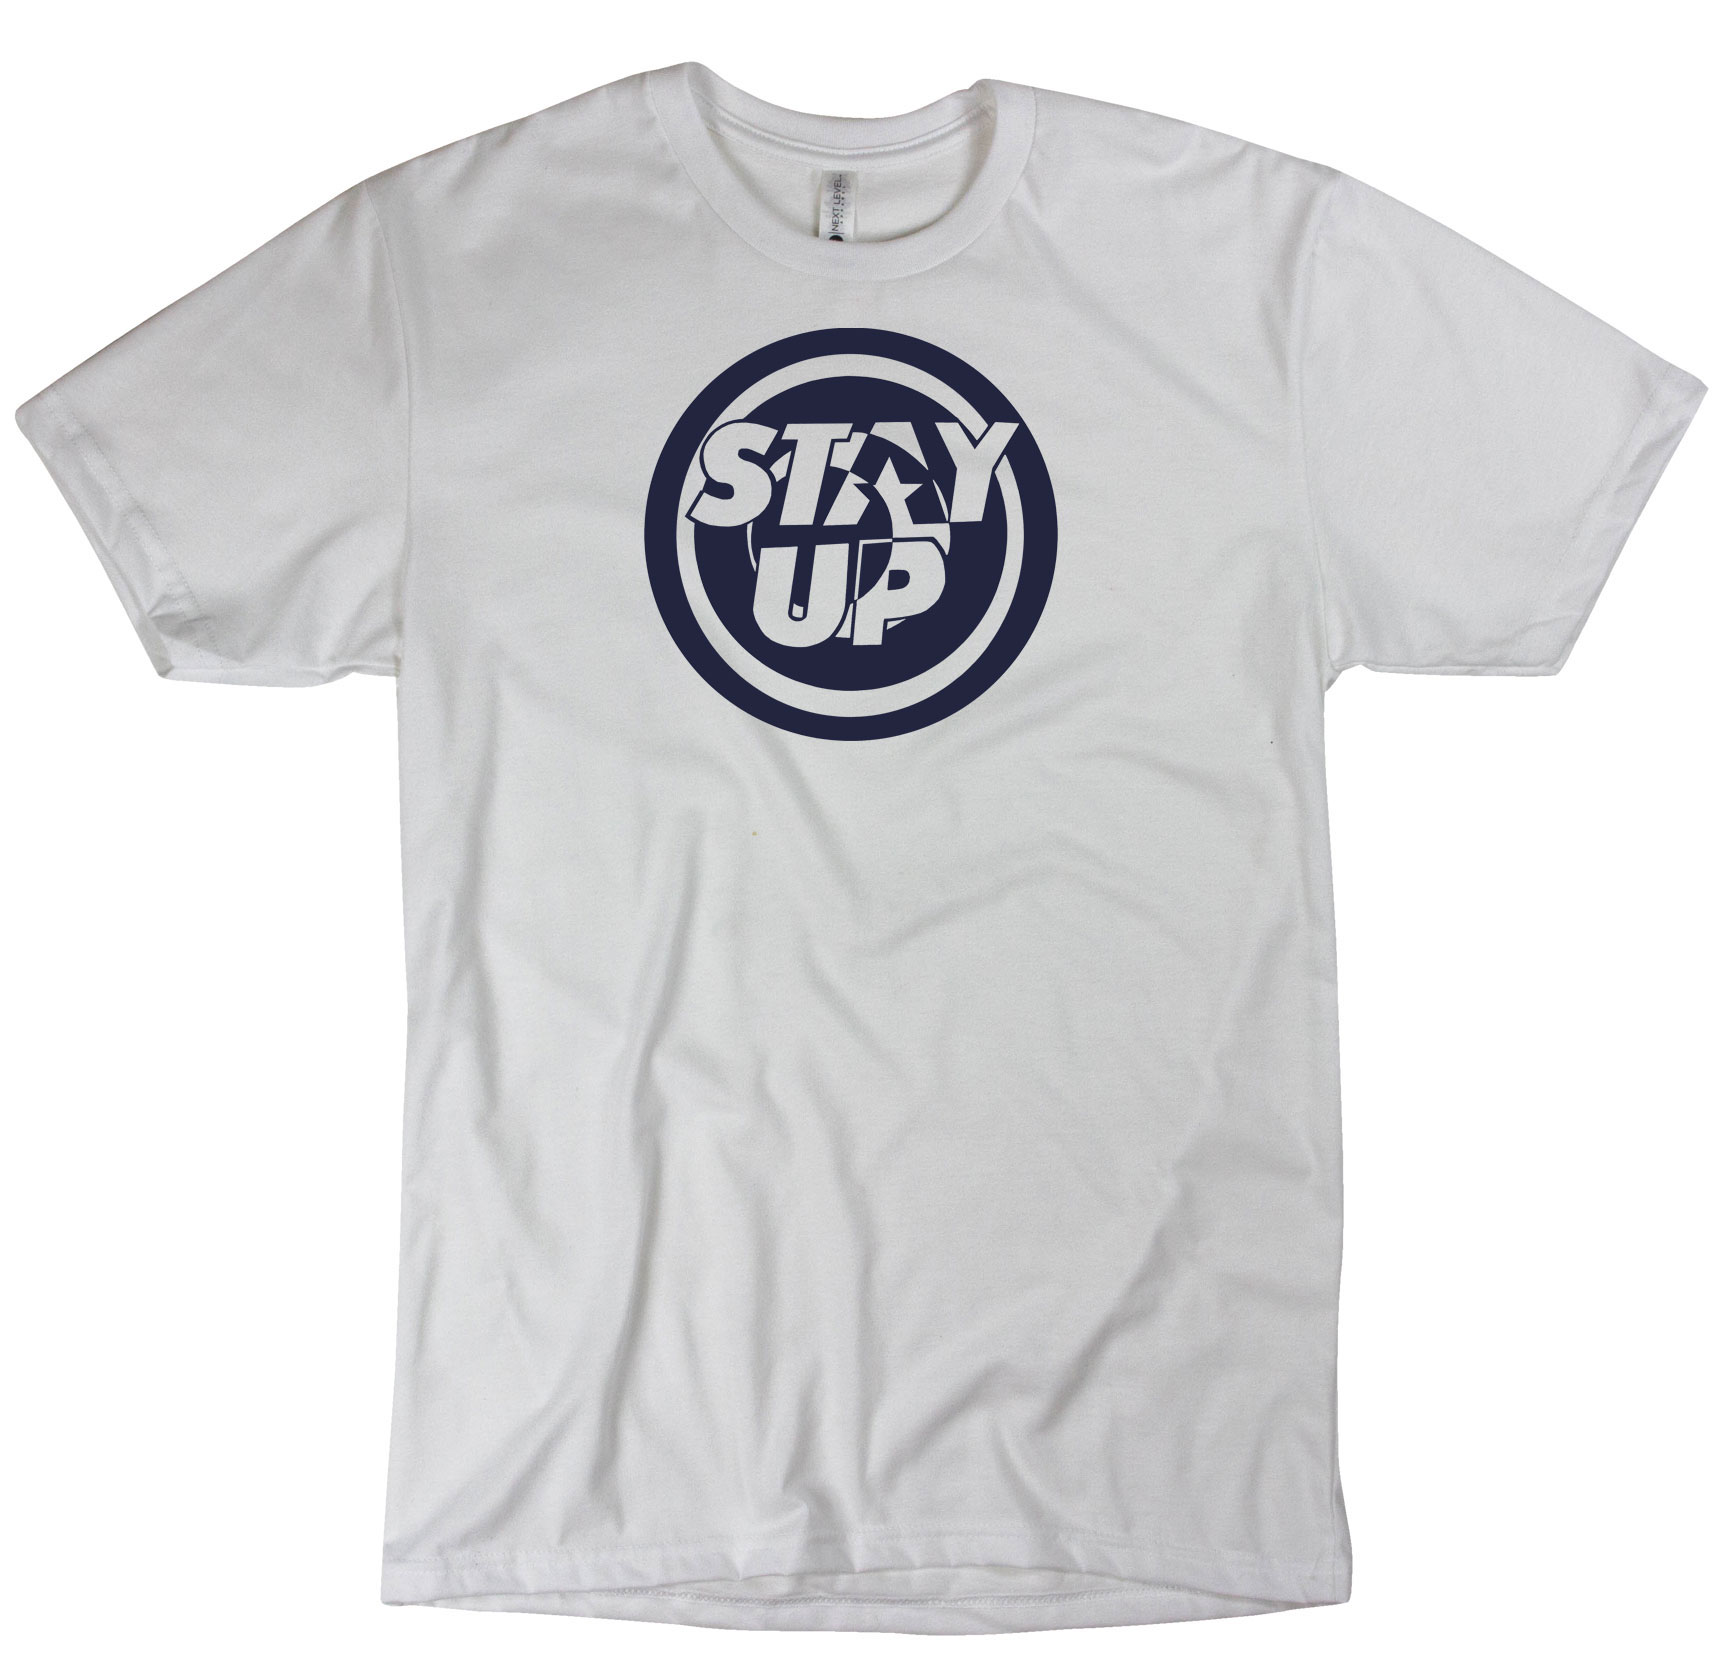 stay up zone t shirt